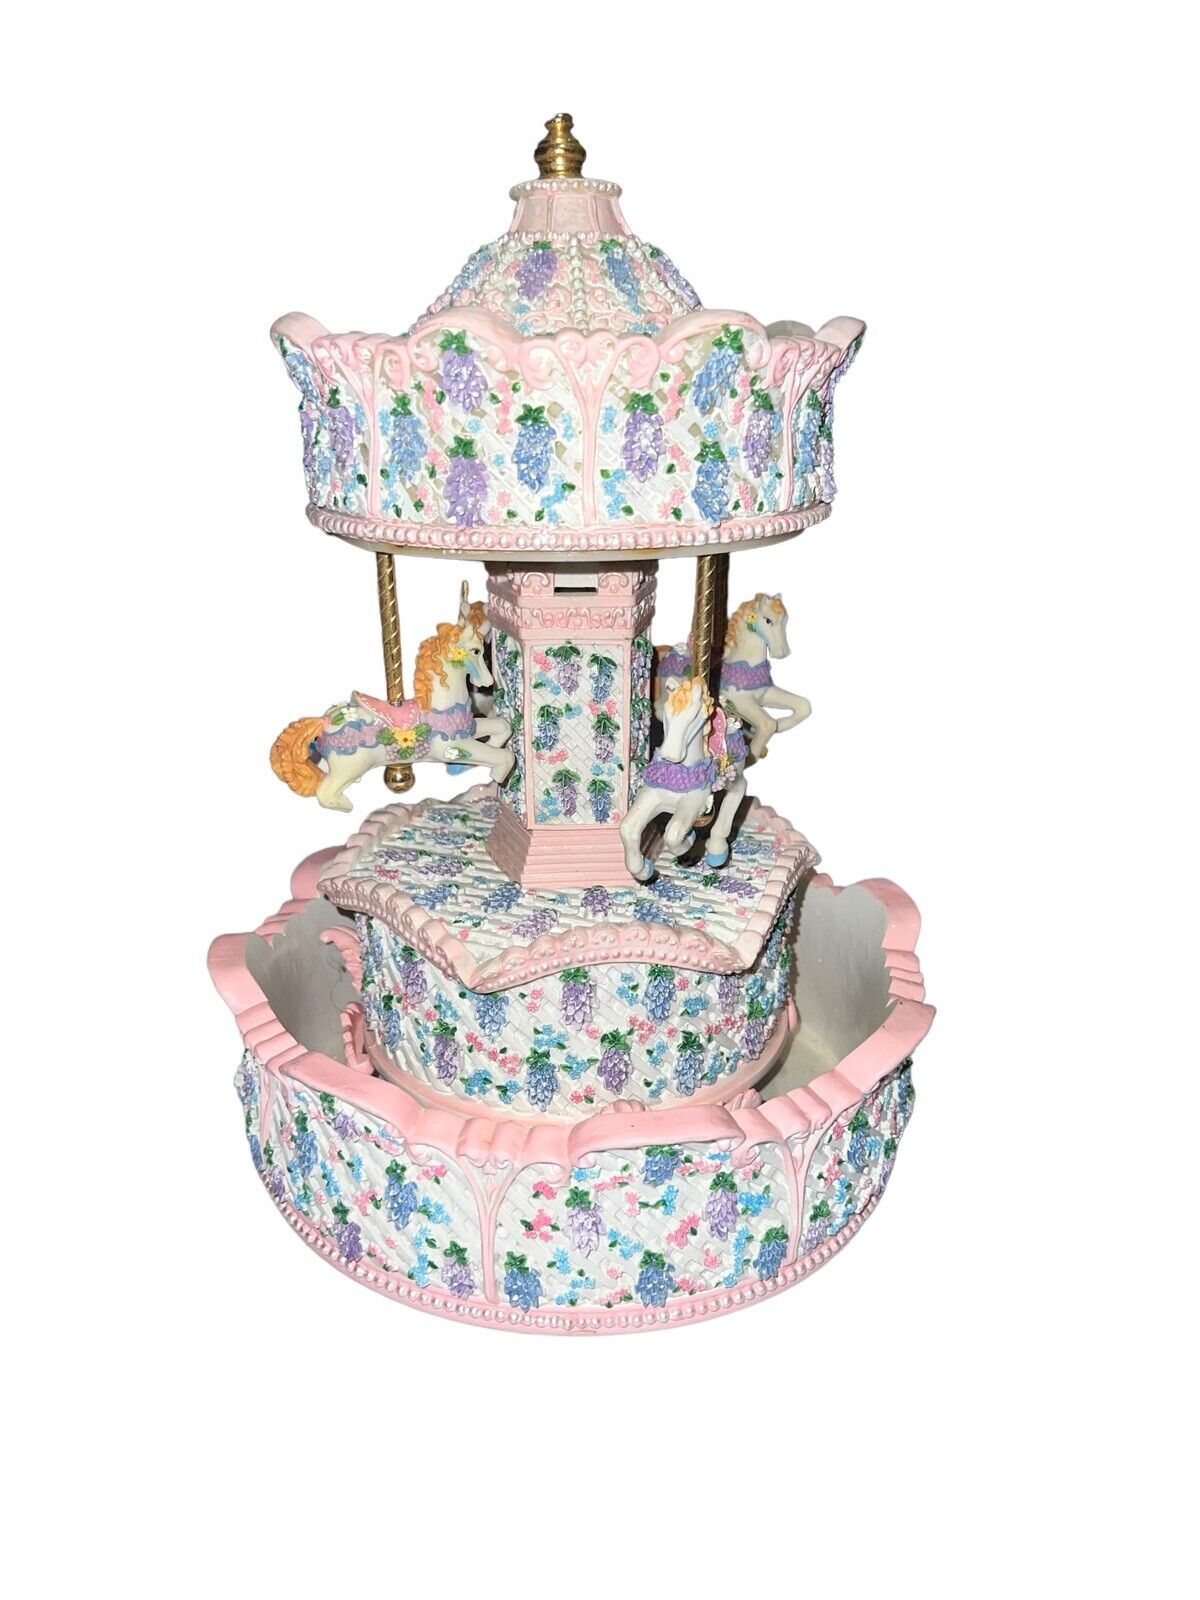 Vintage Rotating Musical Carousel With Water Fountain